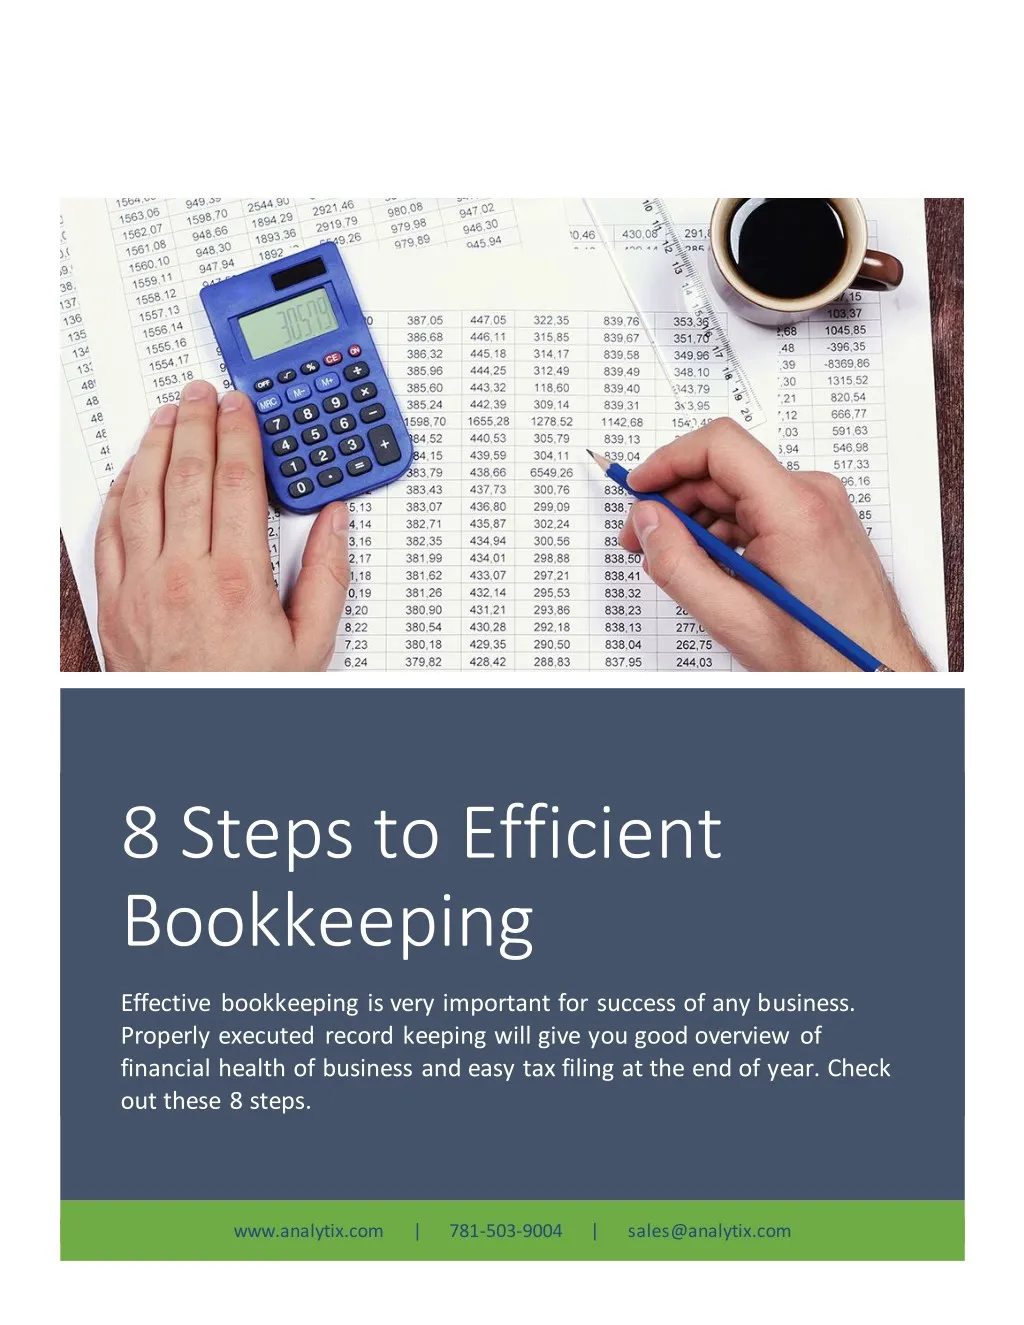 8 steps to efficient bookkeeping